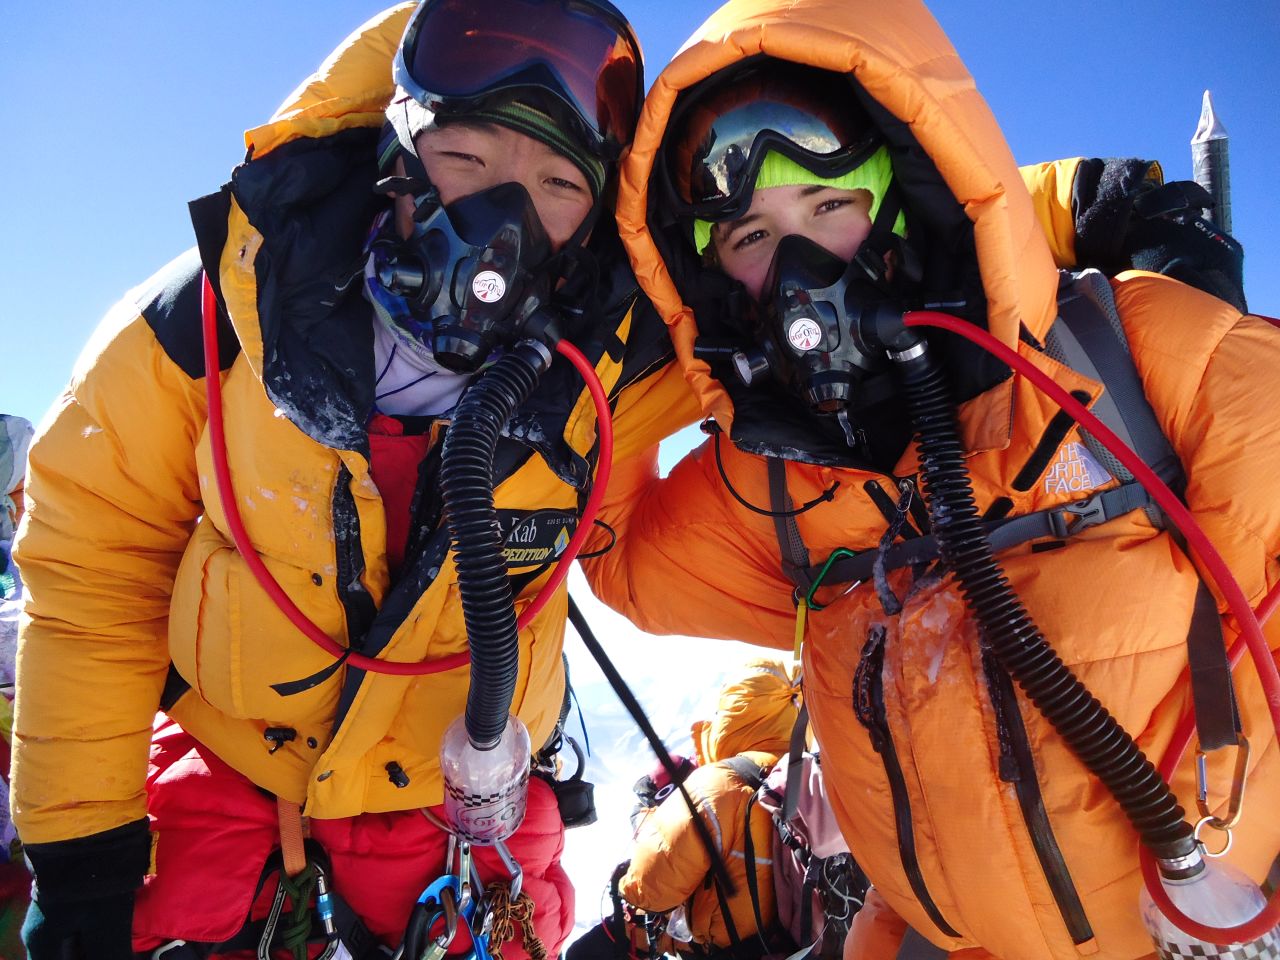 Aged just 13, Jordan Romero braved Everest in May 2010, becoming the <a href="http://edition.cnn.com/2010/WORLD/asiapcf/05/22/teen.mount.everest/index.html">youngest person</a> to reach its summit.